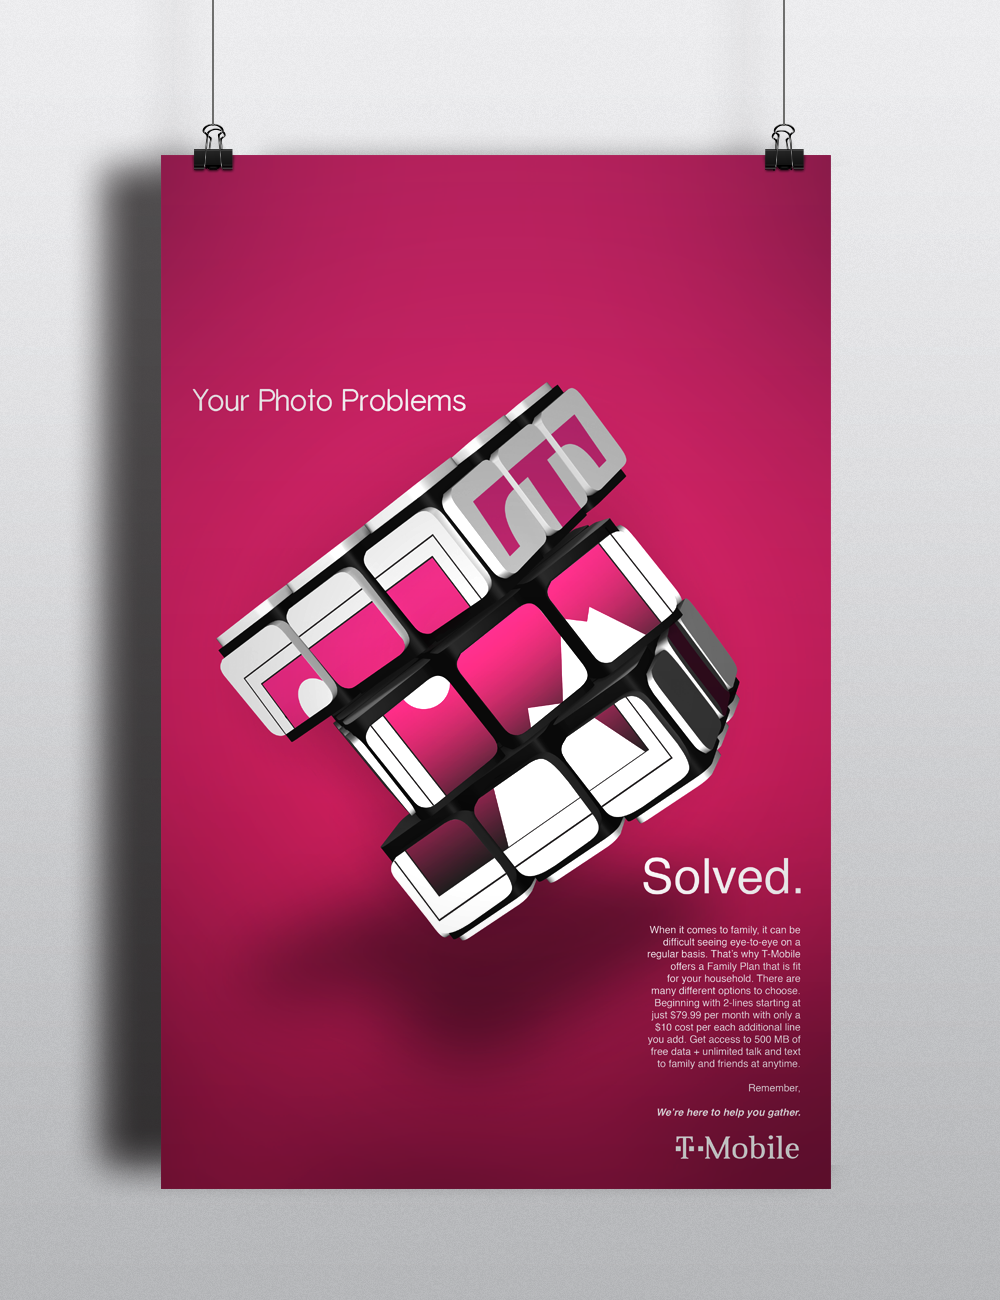 T-Mobile poster advertisement commercial 3D photomanipulation